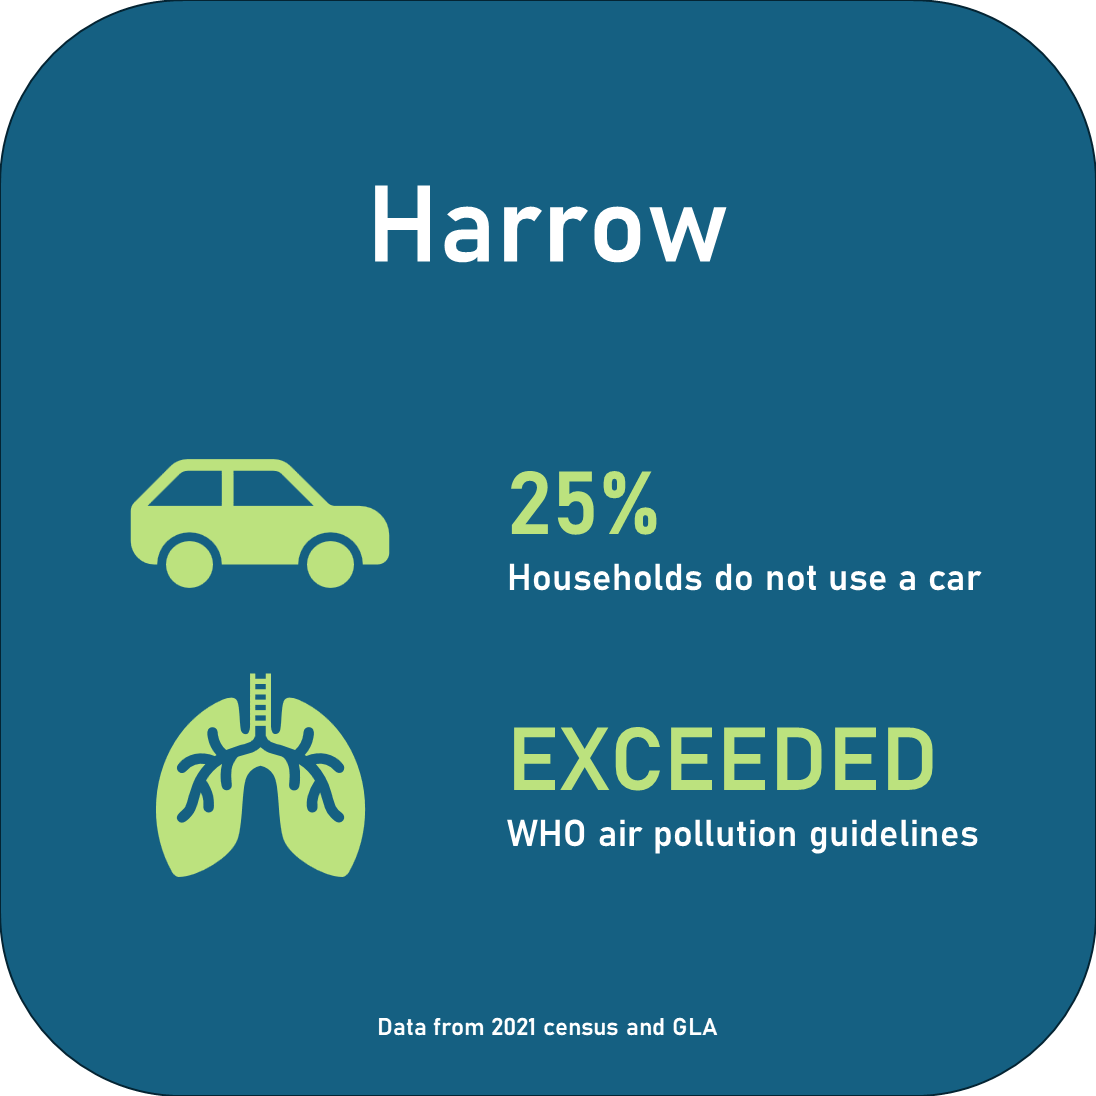 25% households do not use a car. Exceeded WHO air pollution guidelines.